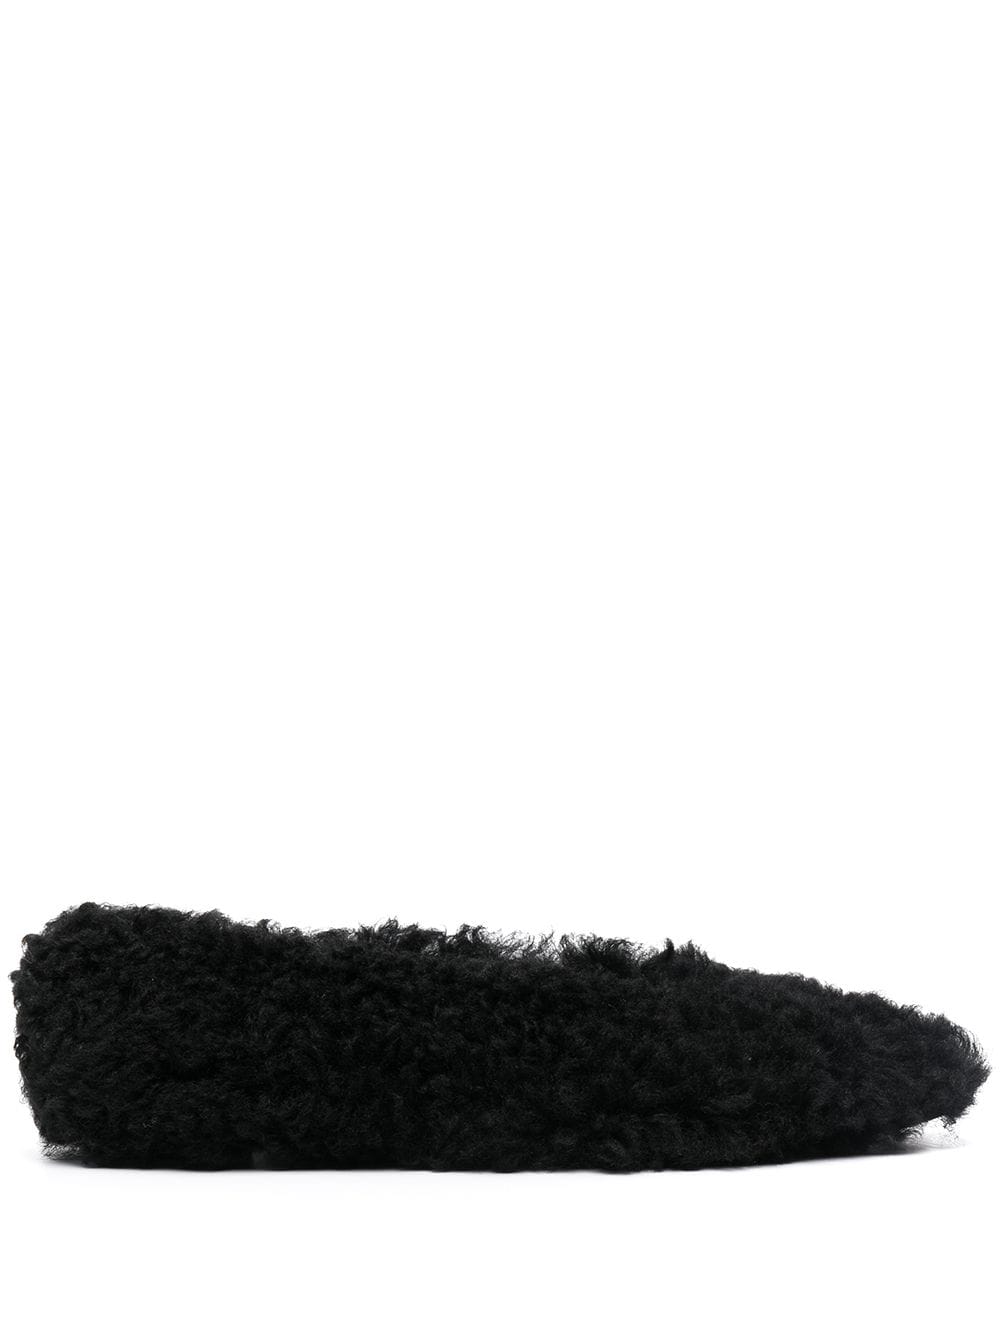 Buy Marni Ballerina In Black Sheep Wool online, shop Marni shoes with free shipping